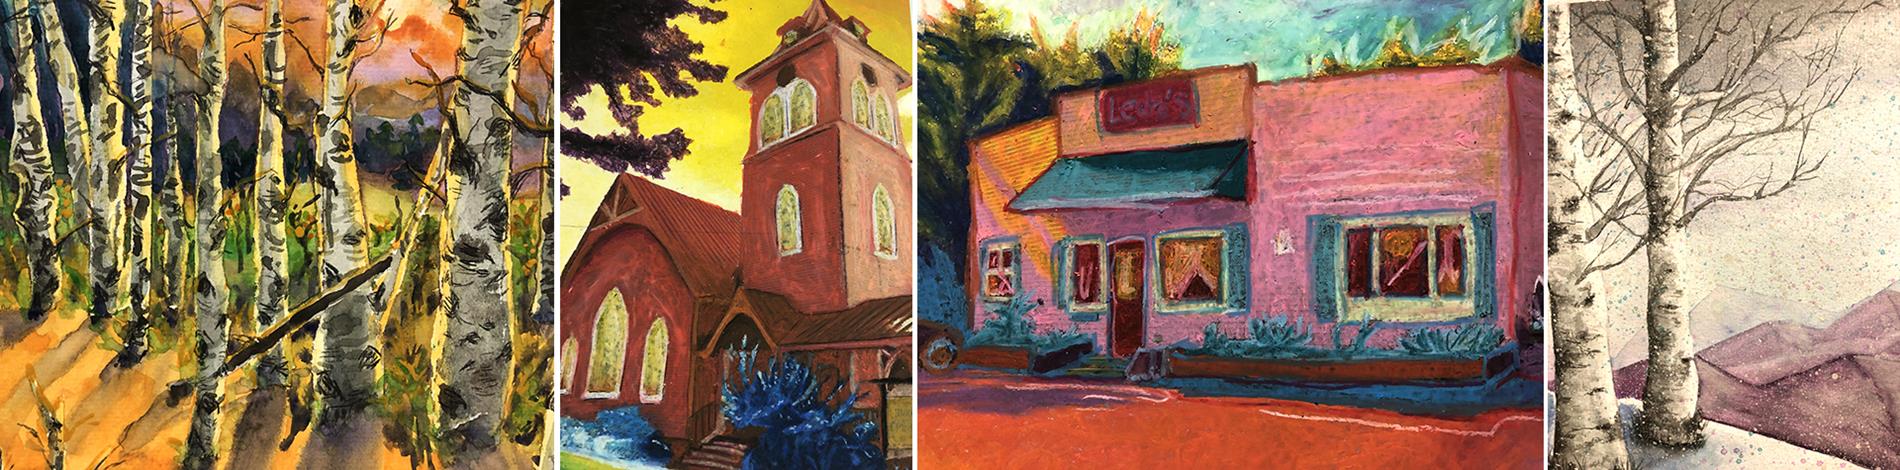 student paintings of local landmarks and landscapes